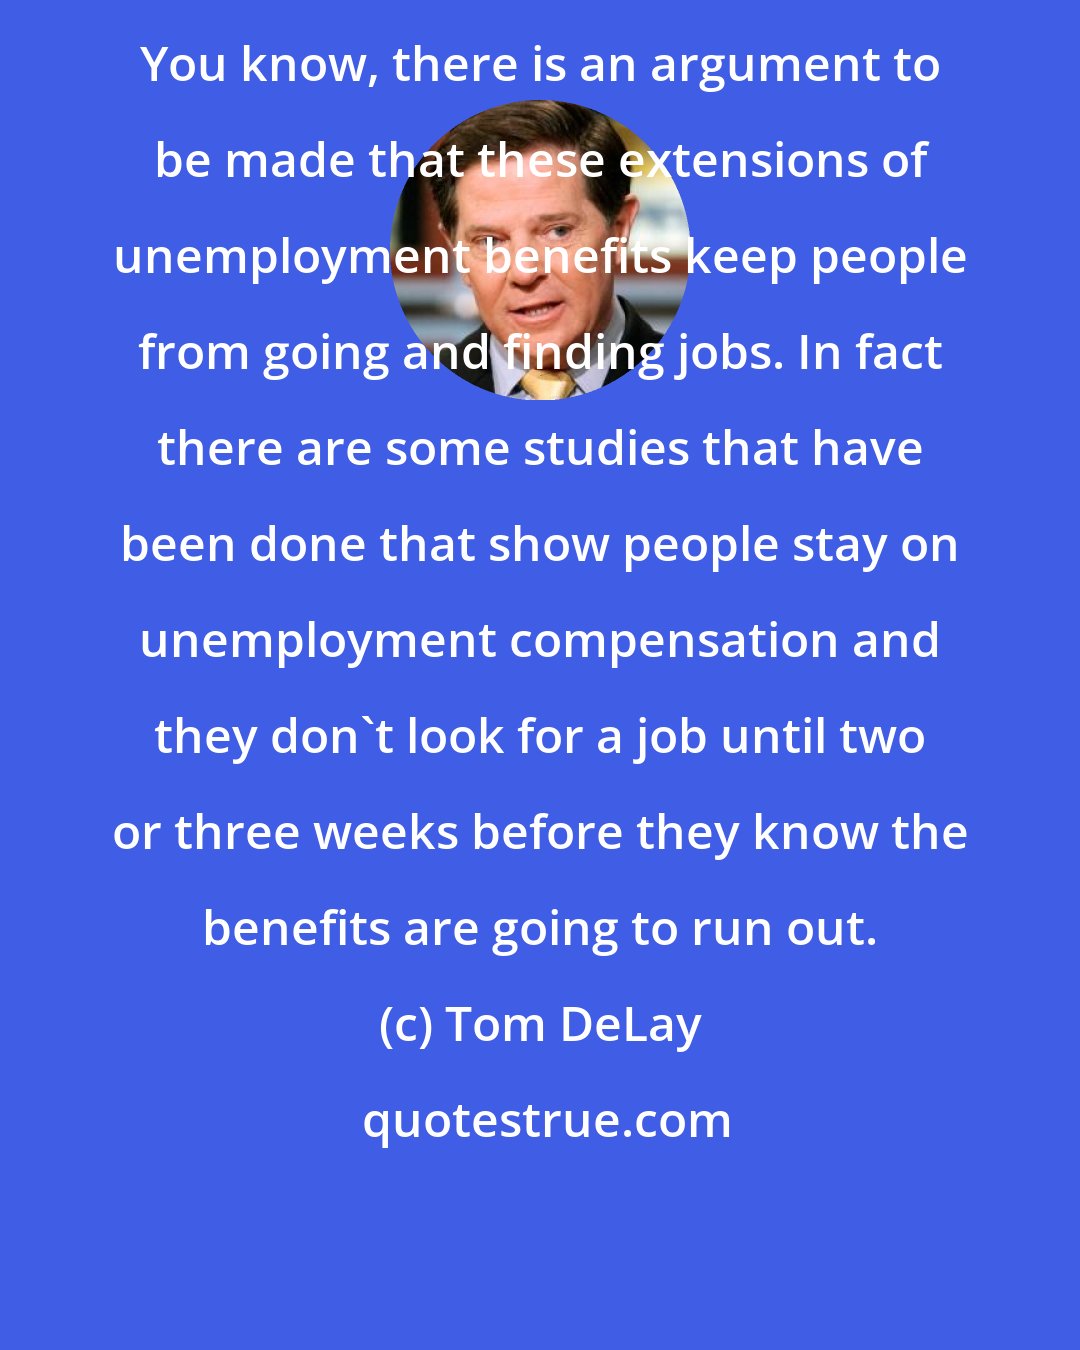 Tom DeLay: You know, there is an argument to be made that these extensions of unemployment benefits keep people from going and finding jobs. In fact there are some studies that have been done that show people stay on unemployment compensation and they don't look for a job until two or three weeks before they know the benefits are going to run out.